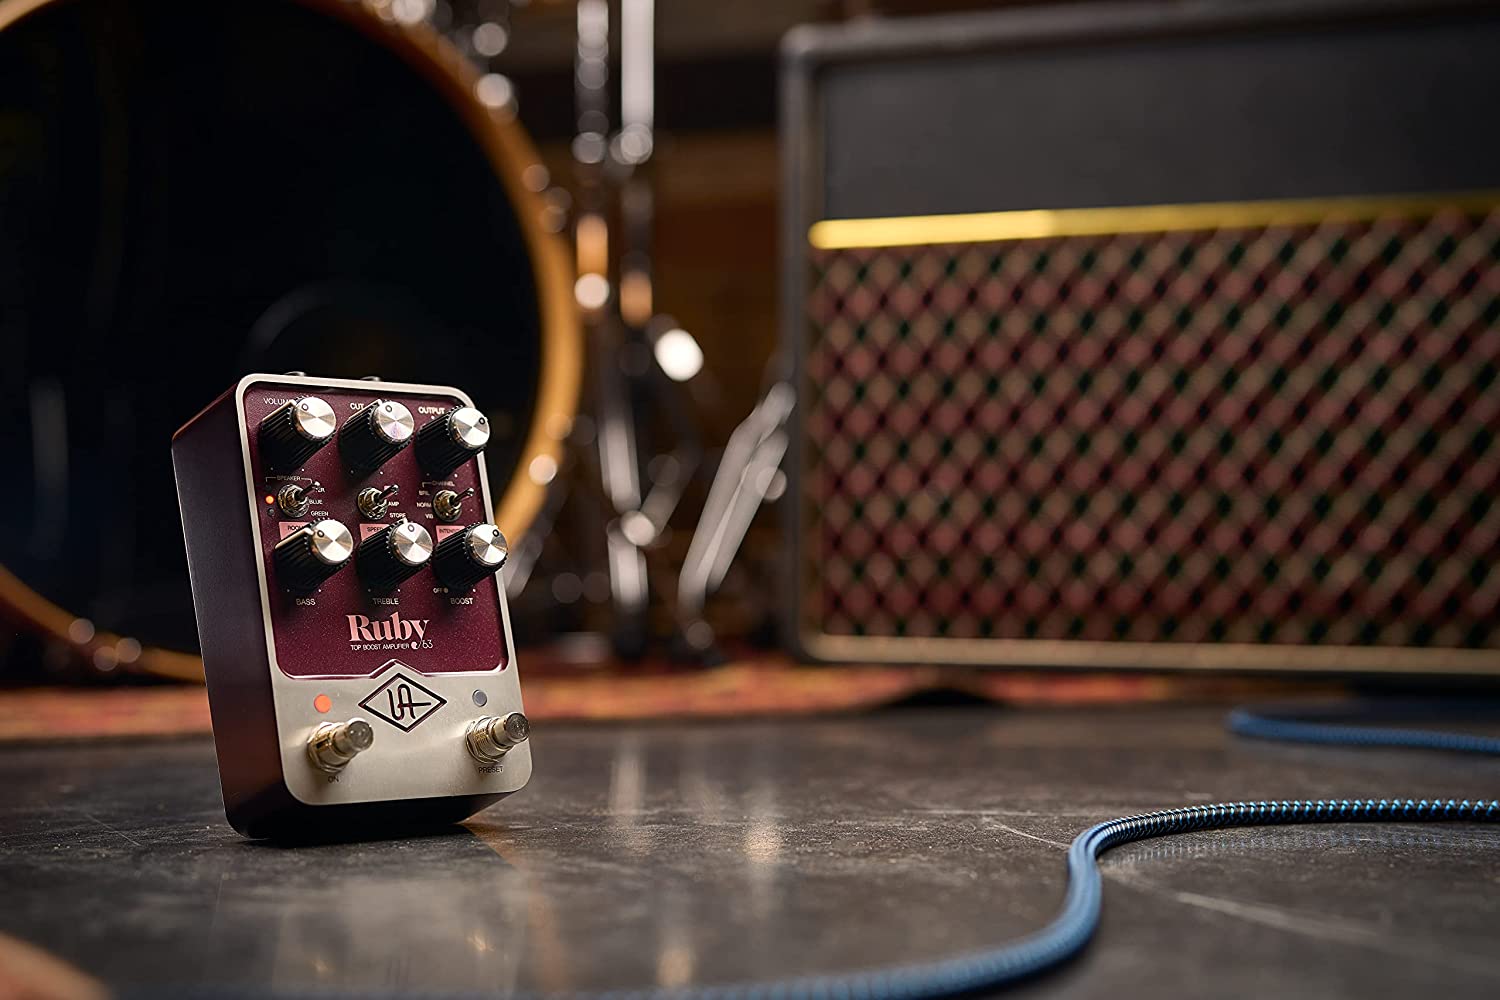 The Universal Audio Ruby guitar pedal sitting in front of the Vox AC30 amp it emulates